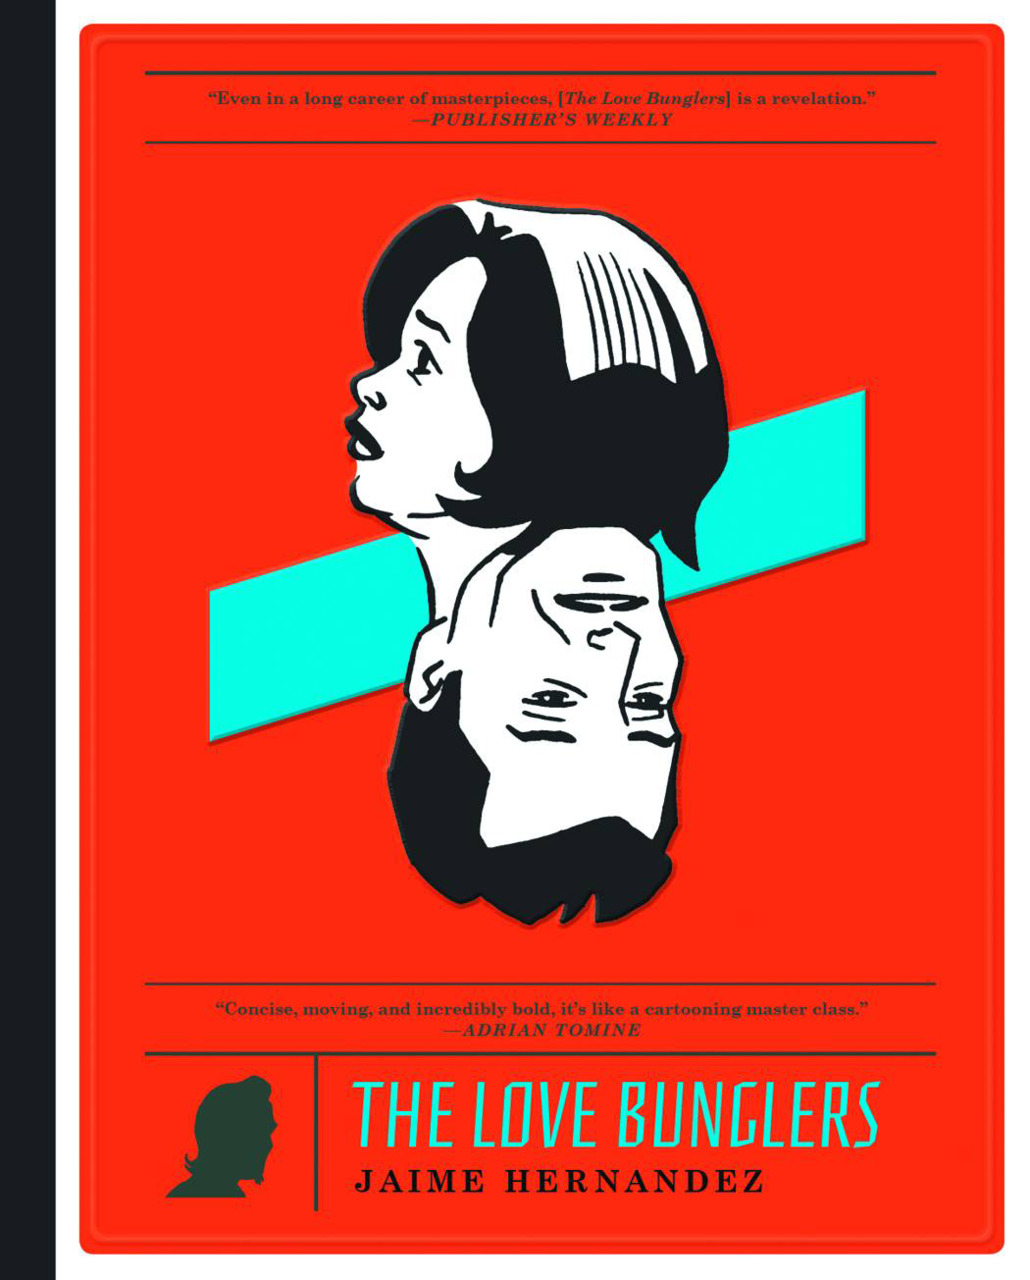 The 100 Best Comics of the Decade: The Love Bunglers